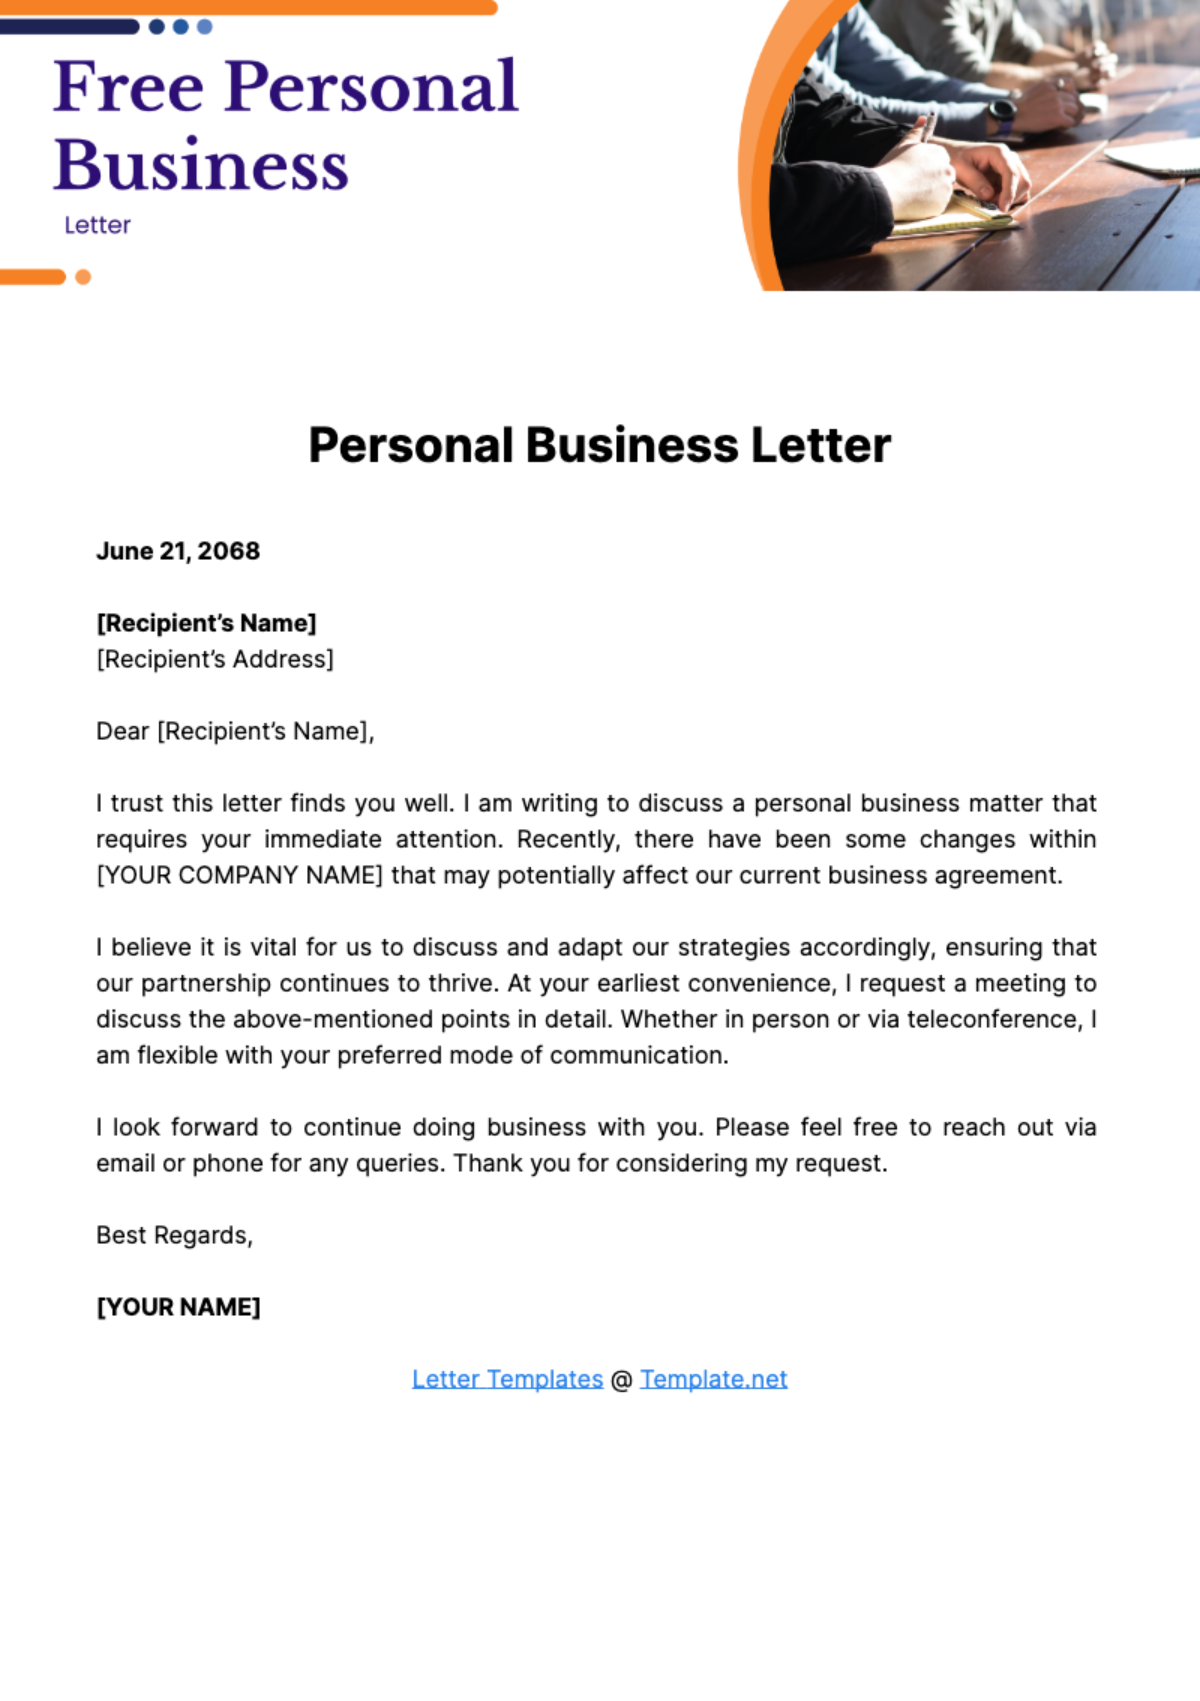 Personal Business Letter Template